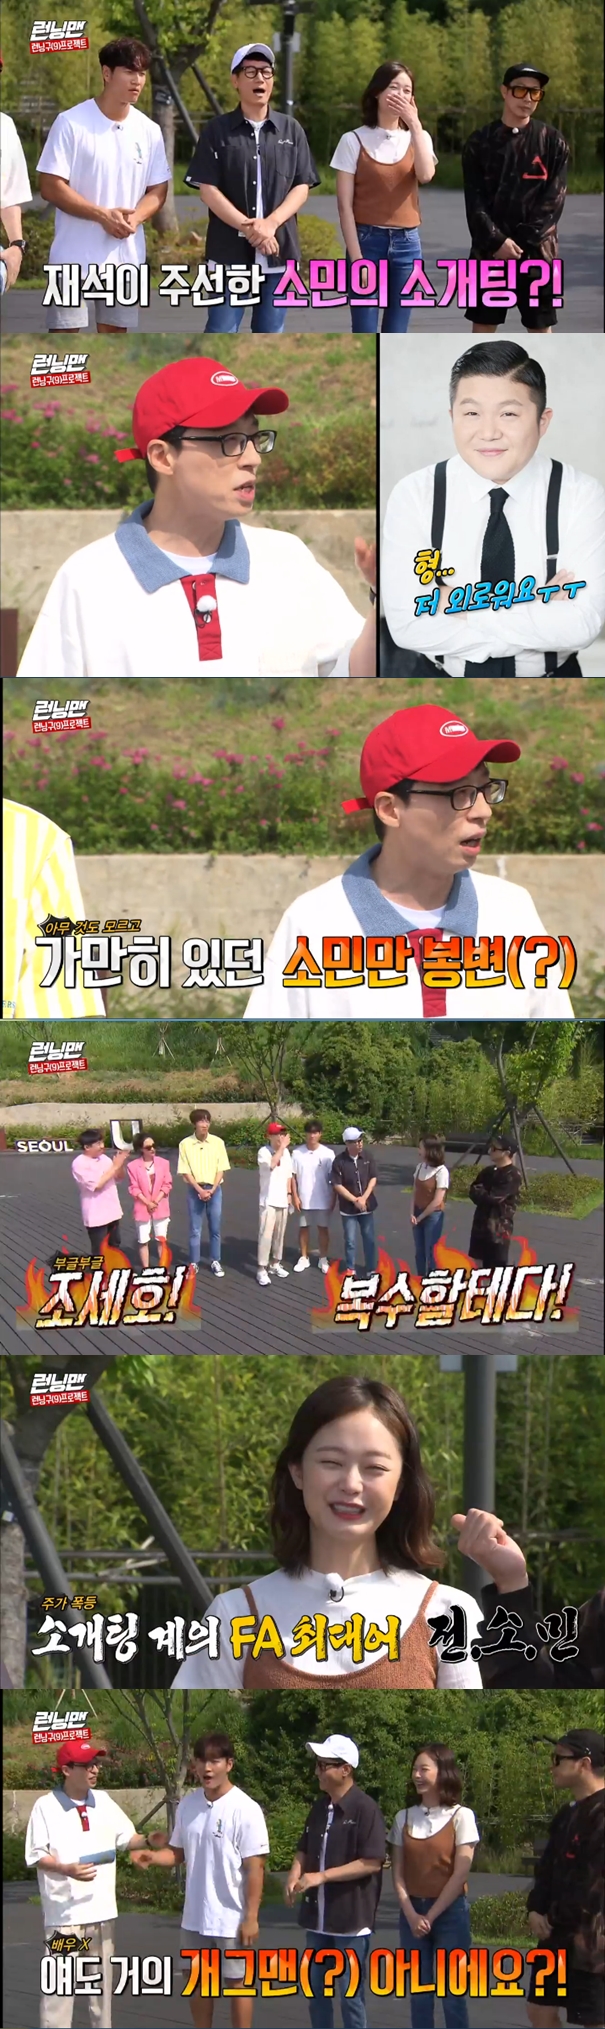 Jeon So-min vows revenge on Jo Se-hoIn the SBS entertainment program Running Man broadcasted on the afternoon of the 23rd, Seol In-ah and Cheong-ha came out as guests and ran the running project race of the members.In the opening, Yoo Jae-Suk apologized to Jeon So-min, who had met Jo Se-ho on YouTube broadcast and arranged a blind date with Jeon So-min.However, Jo Se-ho recommended Nam Chang-hee with a nervous expression, and Jeon So-min was one of the questions.Jeon So-min said she watched the broadcast and laughed, Is not there anything to do with such a shitty expression? Then she pledged revenge to Jo Se-ho.Kim Jong Kook comforted him, saying, I introduced Kim Jong Min and he liked it very much.However, Yoo Jae-Suk laughed, saying, Why do you keep introducing the entertainer to Somin?